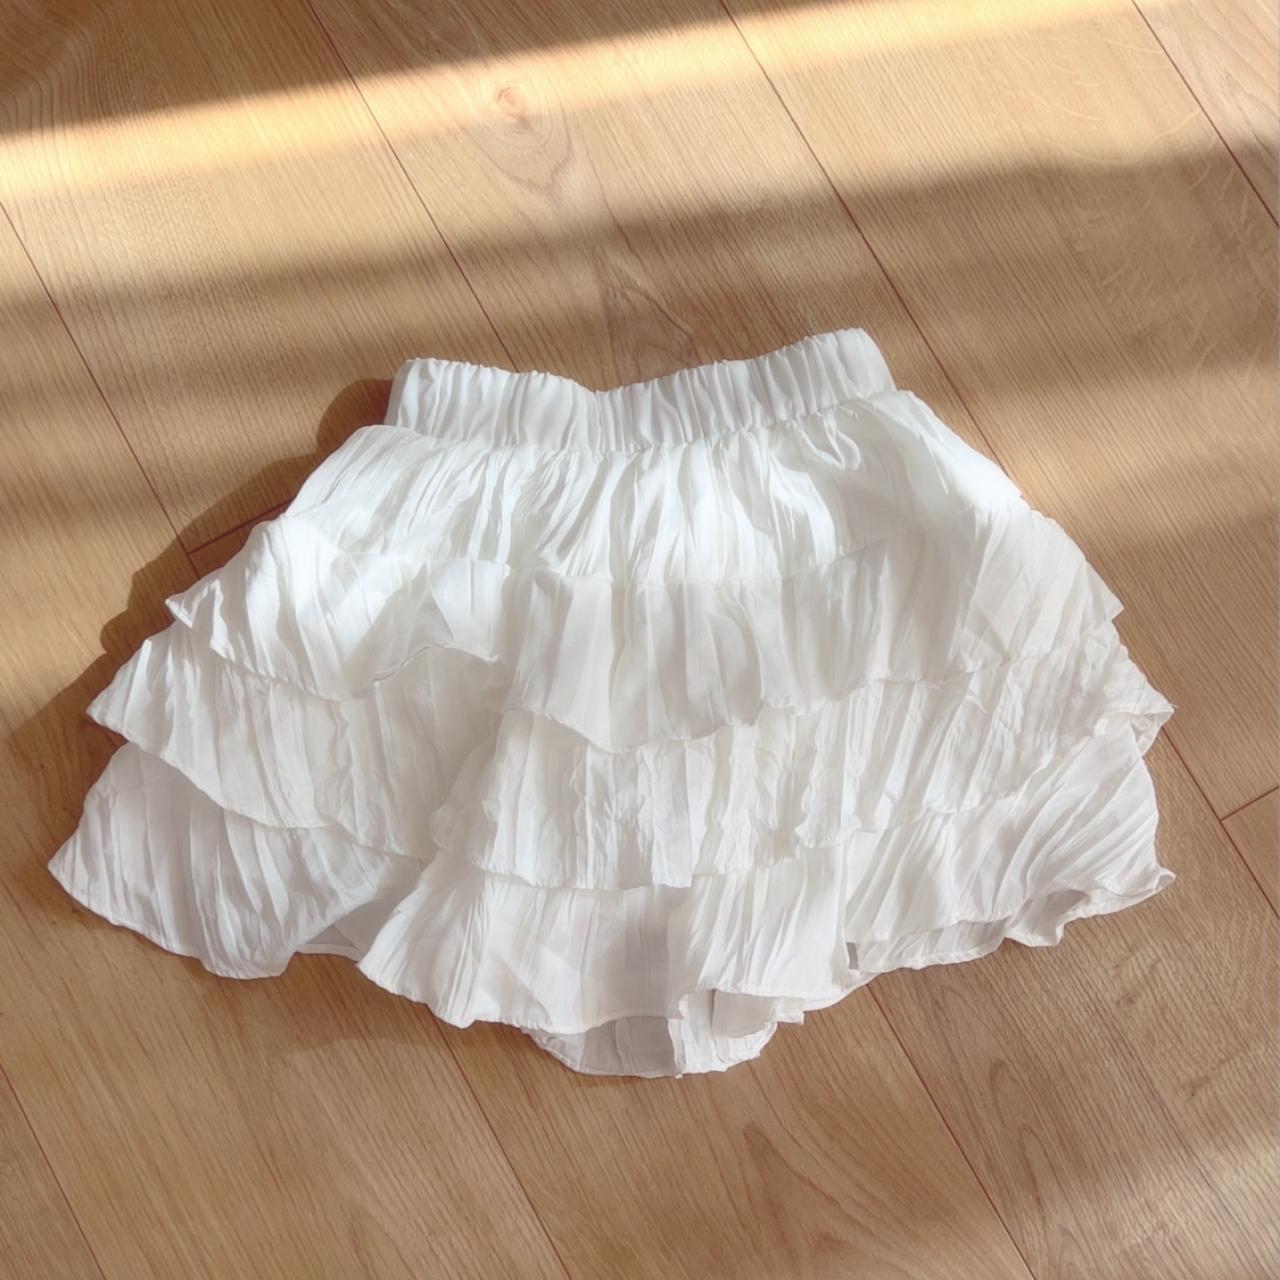 white pleated mini skirt bought from South... - Depop